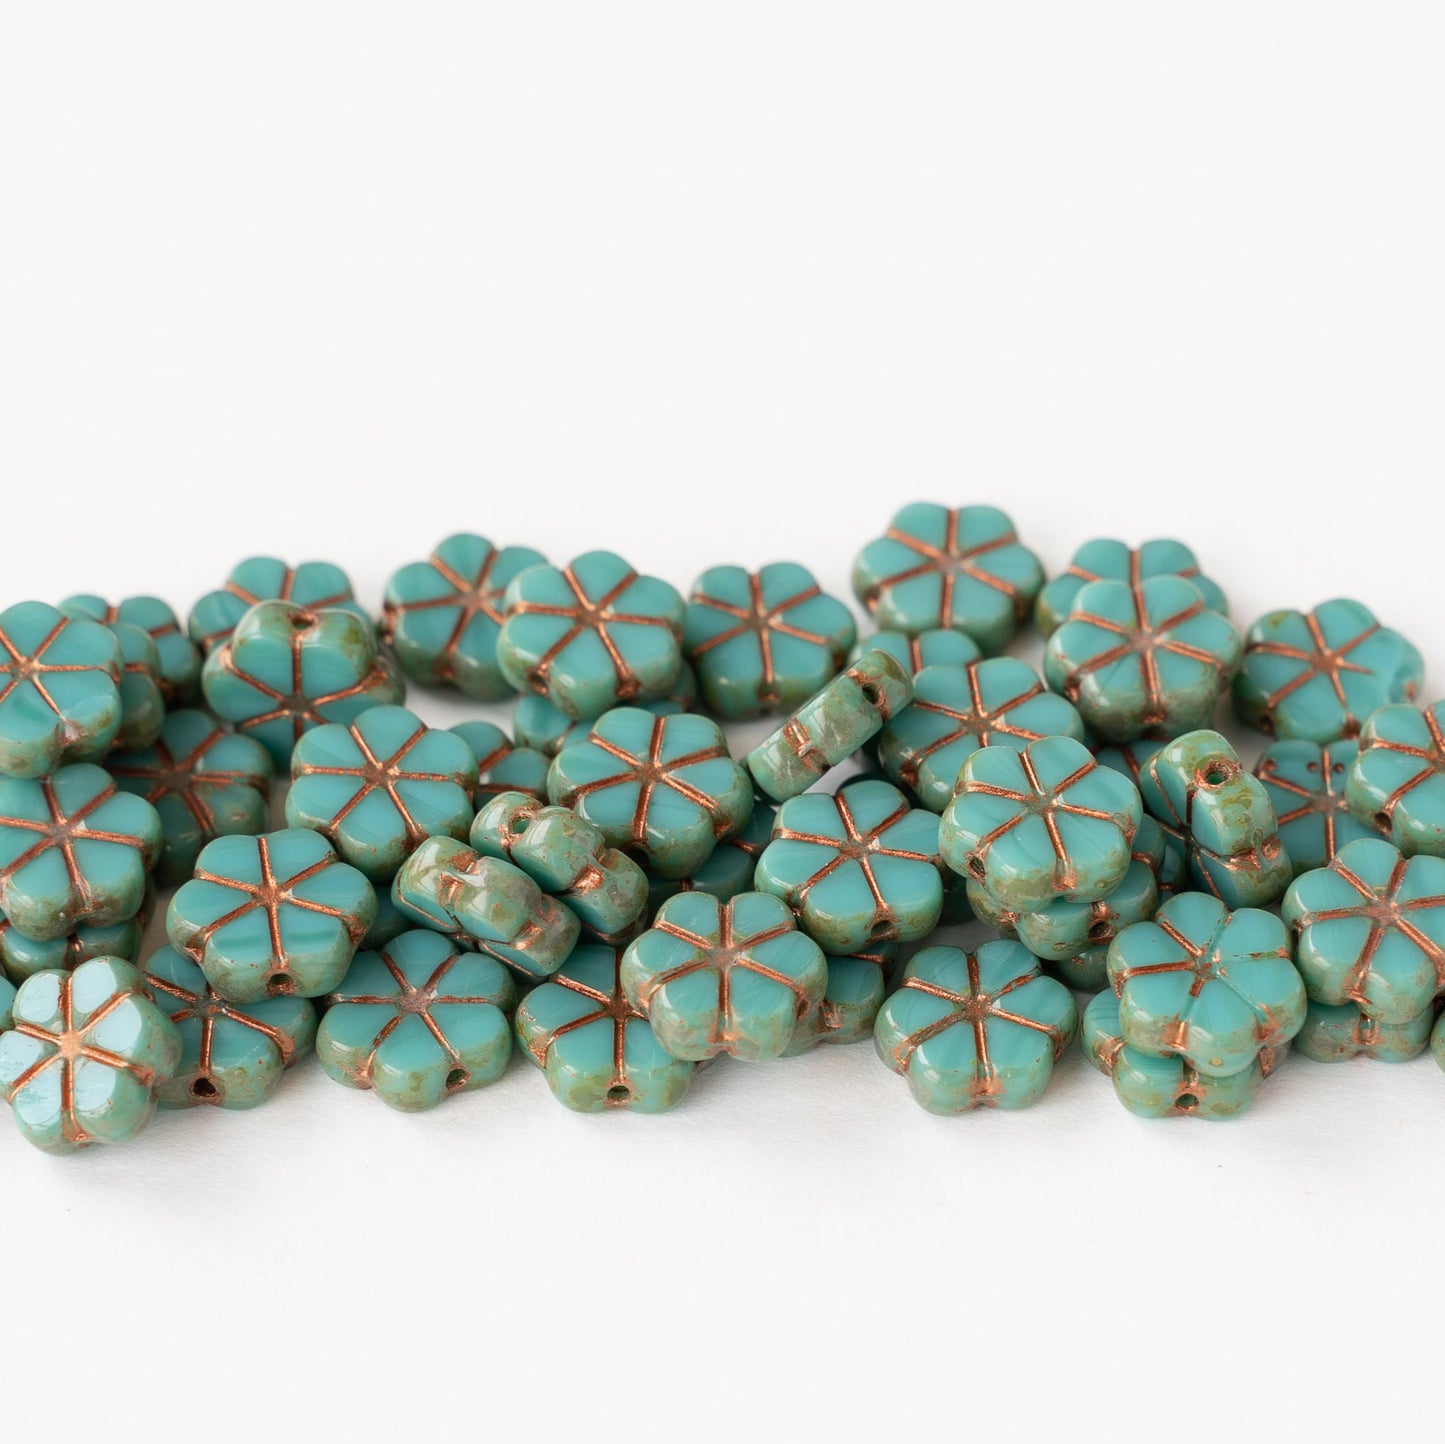 10mm Forget Me Not Flower Beads - Turquoise With Copper Wash - 10 Beads